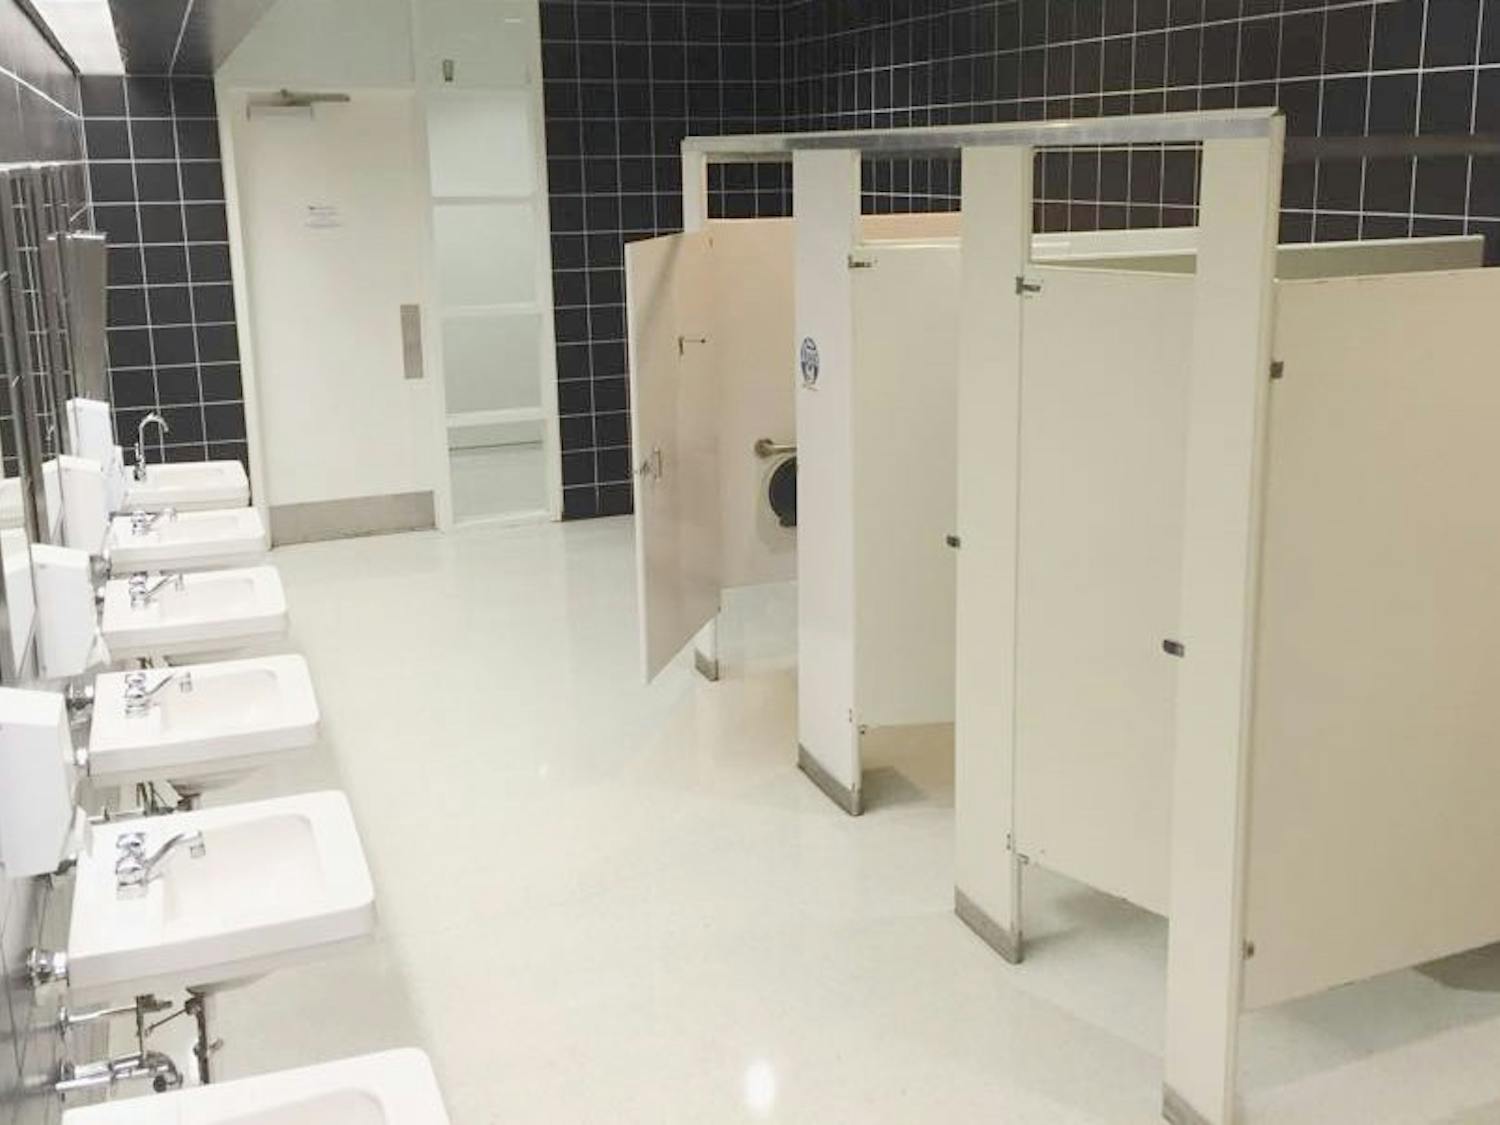 The Center for the Arts bathroom is one of the largest, cleanest and well-maintained bathrooms on campus but is out of the way of many students’ classes.